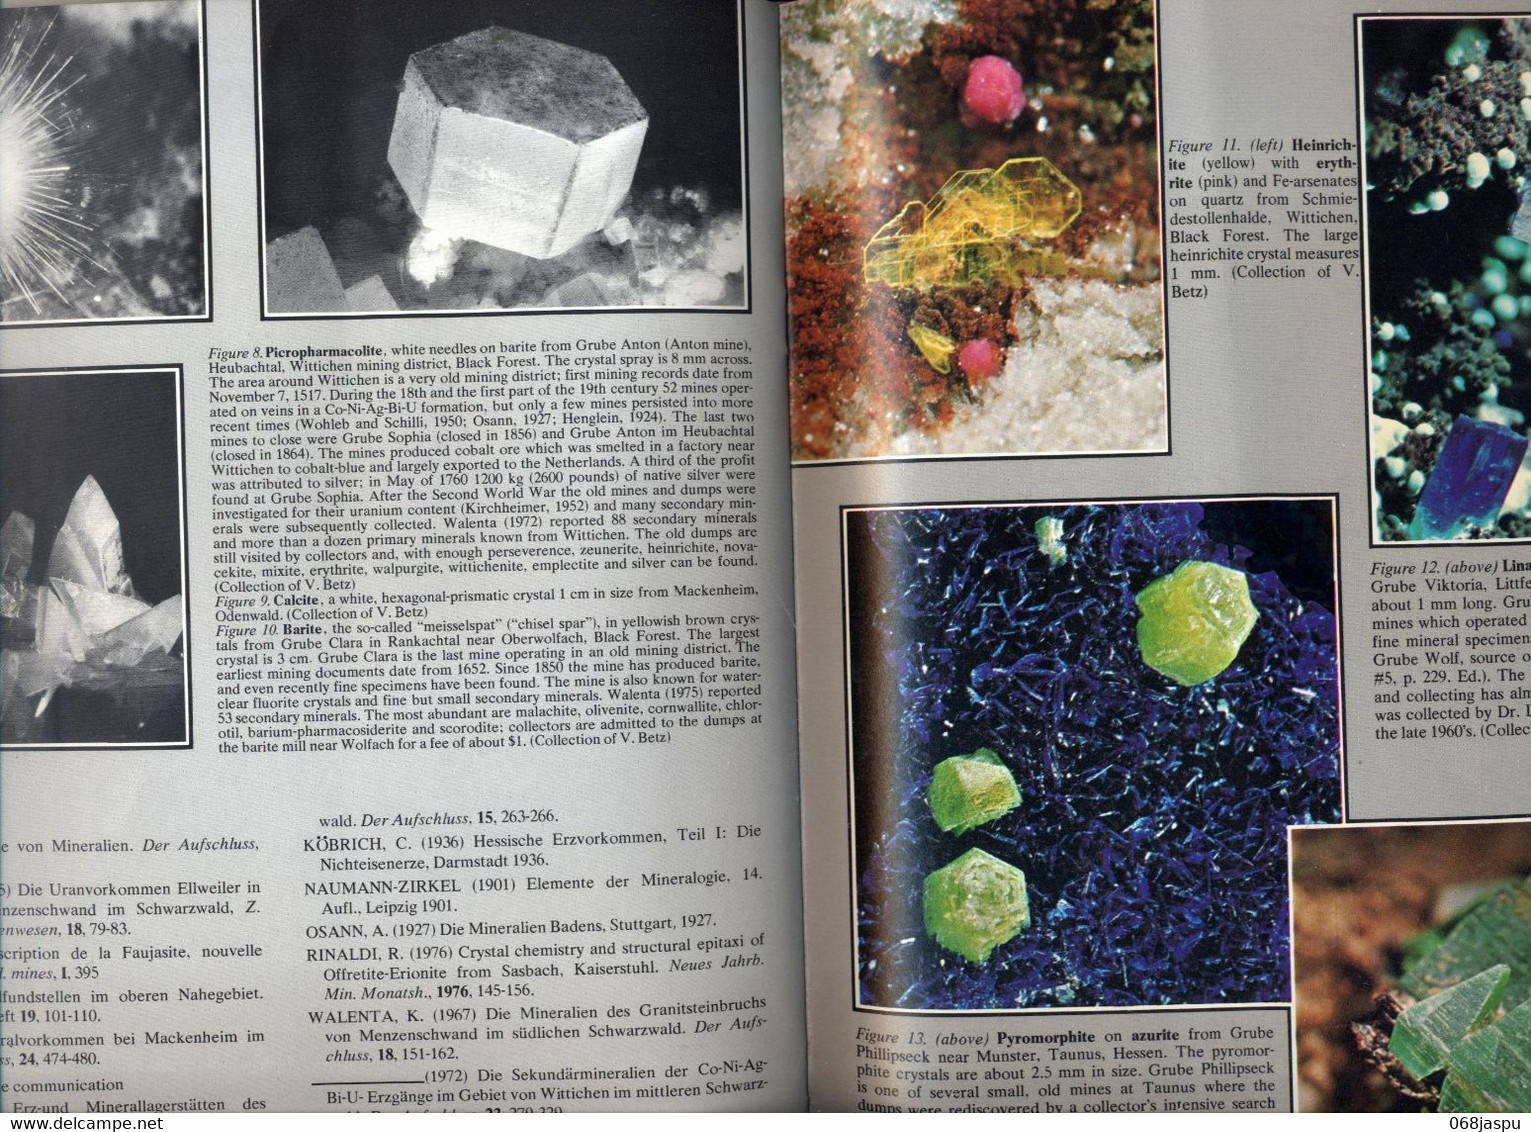 Revue Mineralogie Record Mineraux D'europe  1977 - Nature/ Outdoors